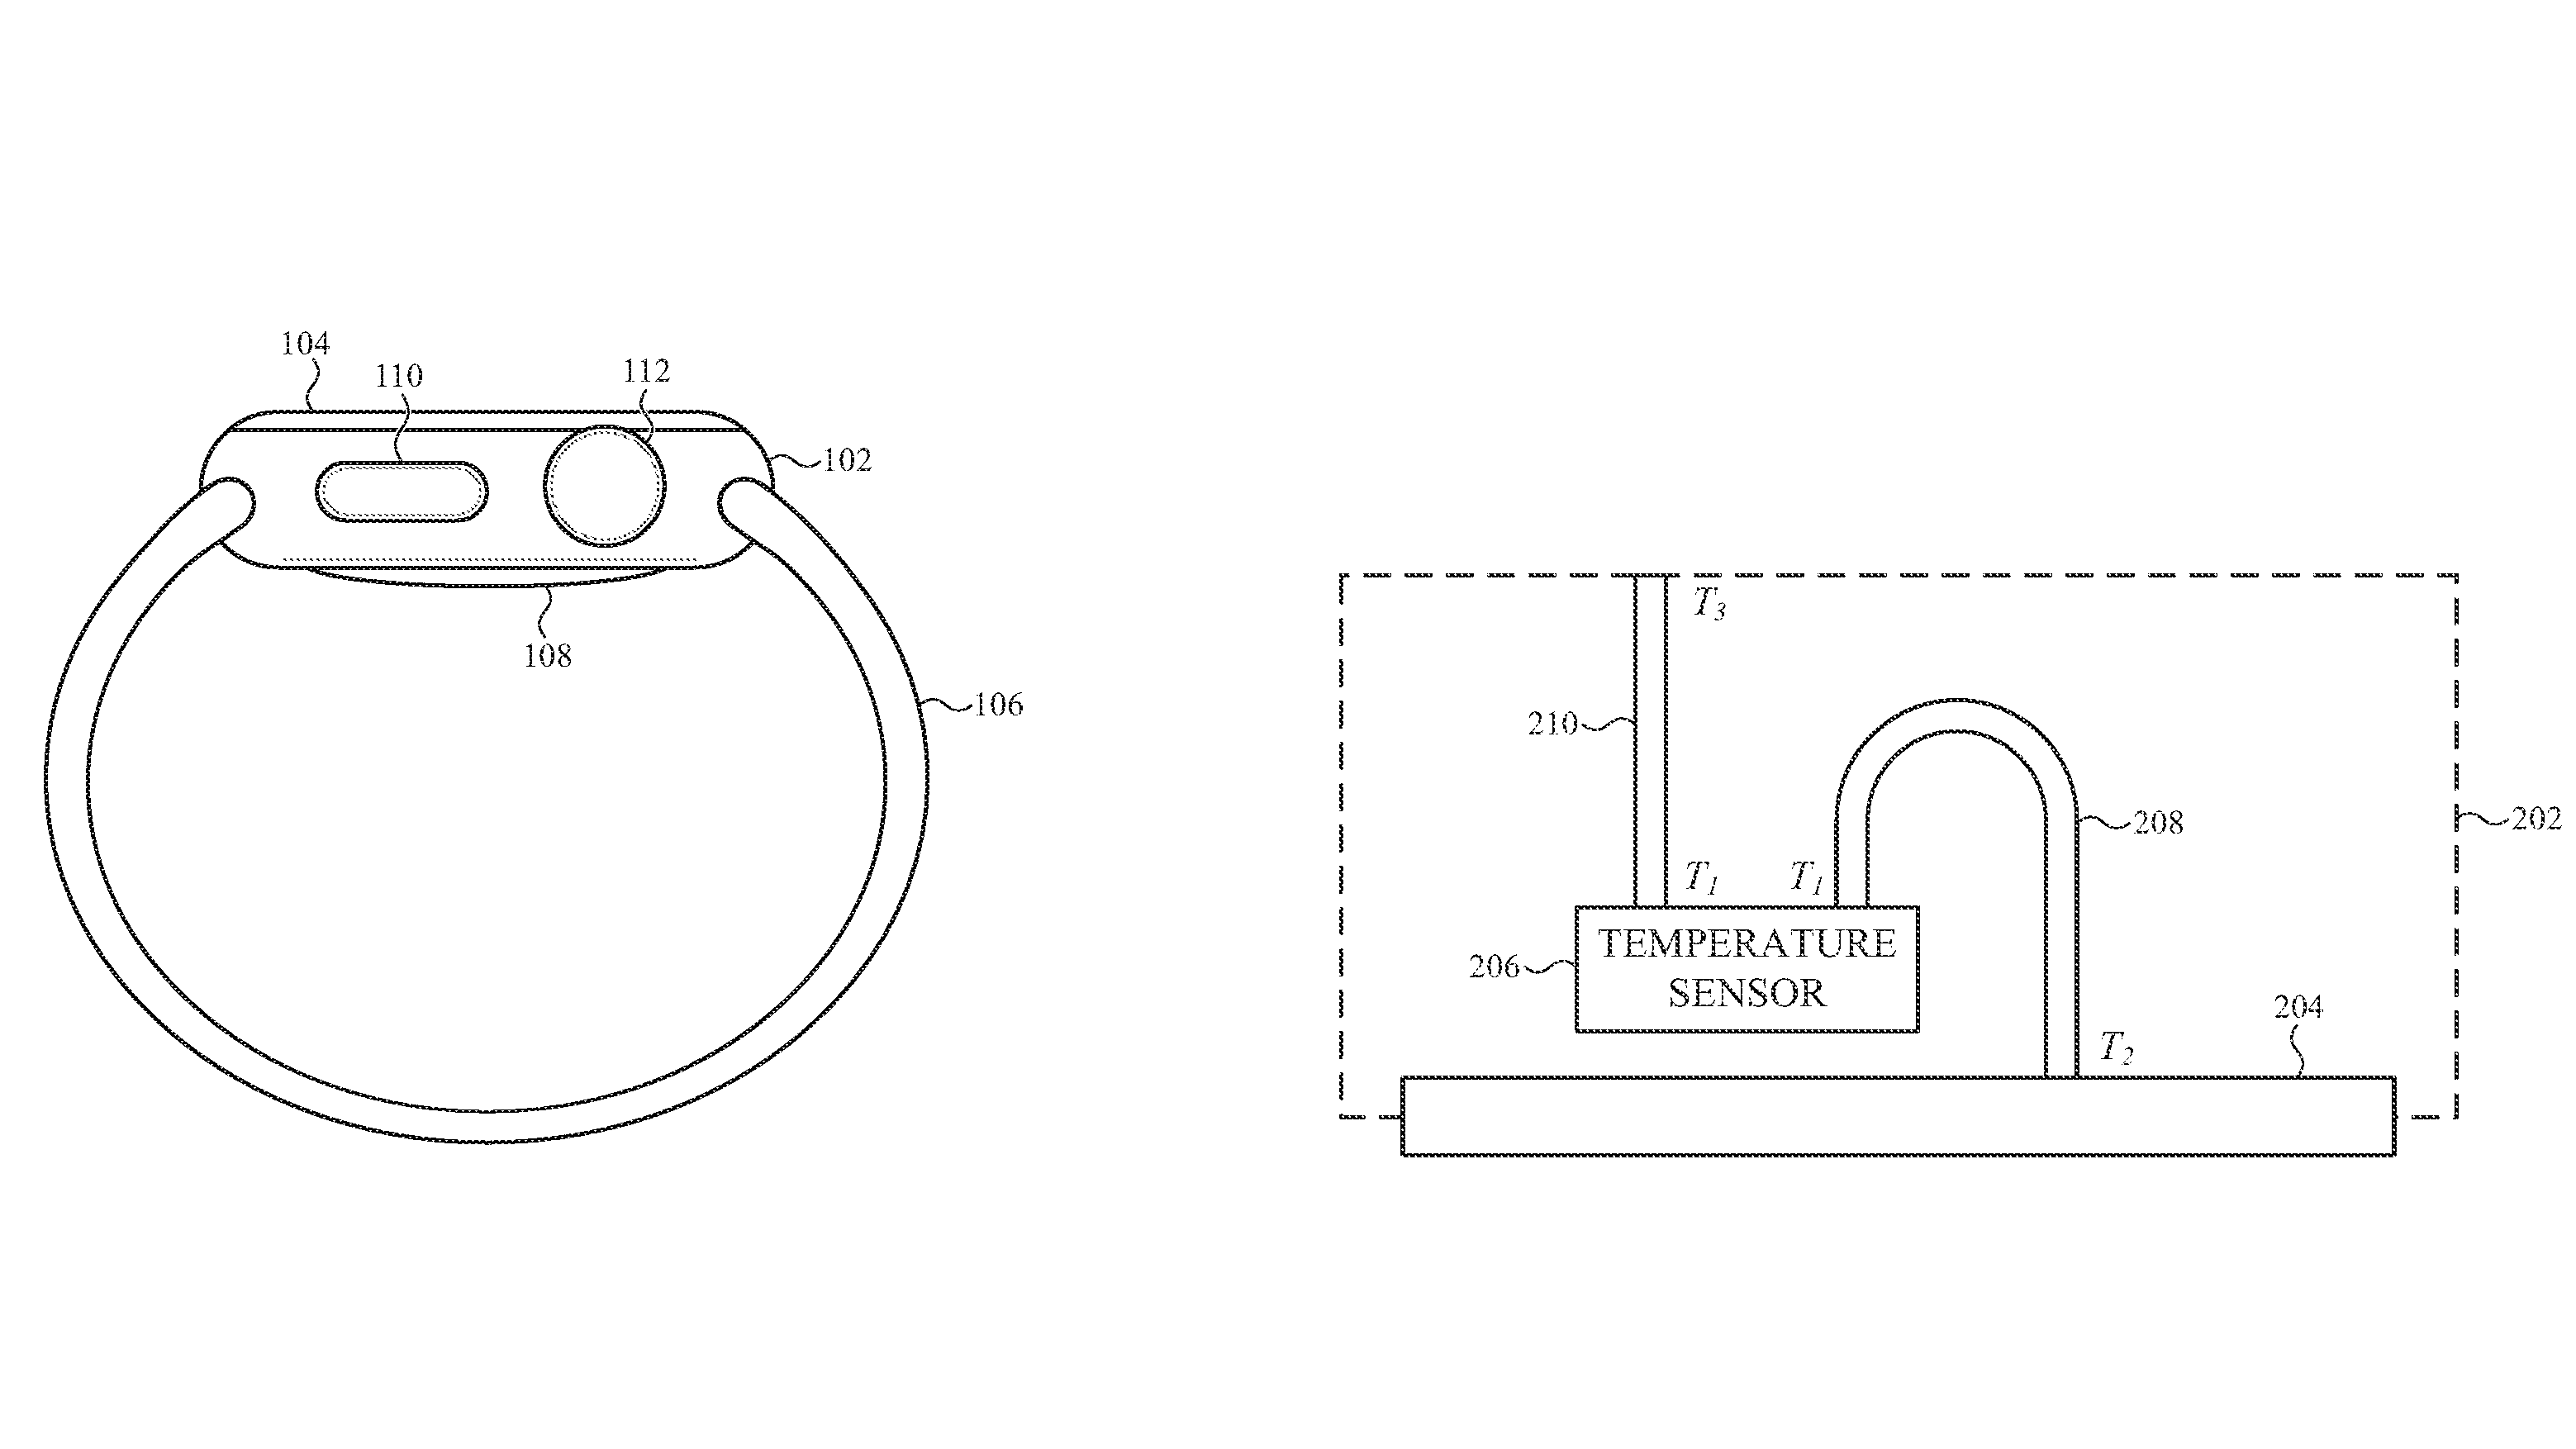 Patent drawing illustrating how an Apple Watch body temperature sensor works